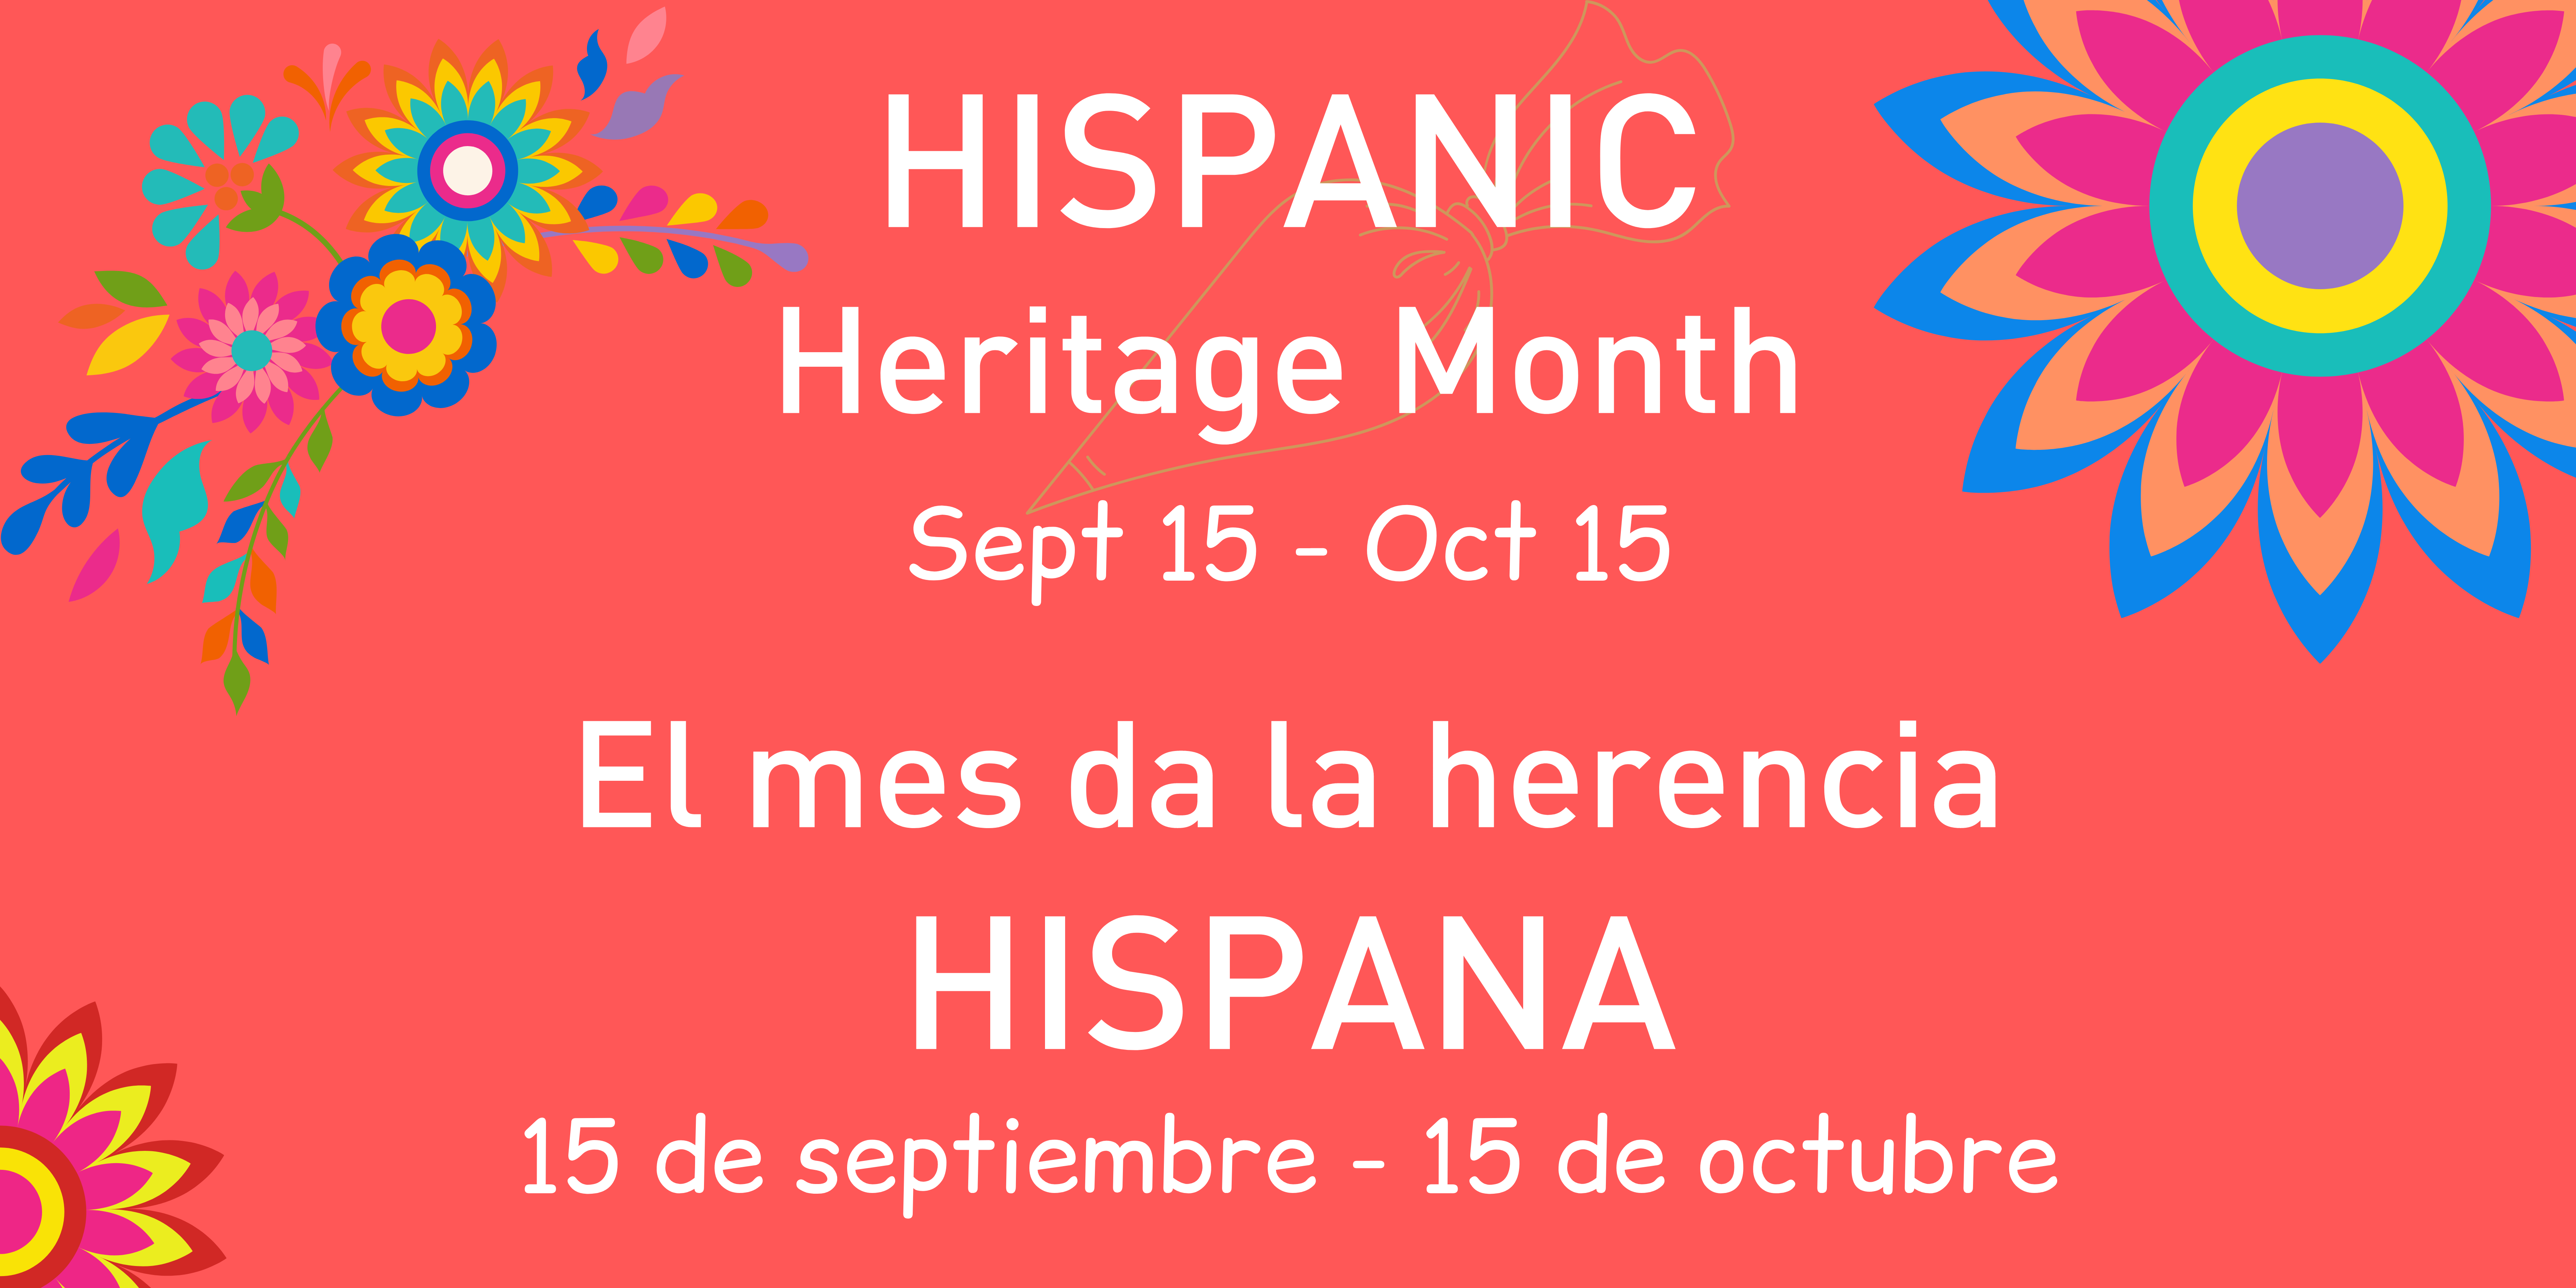 White text on red background with colorful flowers. Text says, "Hispanic Heritage Month Sept 15-Oct 15" and "El mes de la herencia Hispana. 15 de septiembre - 15 de octubre."